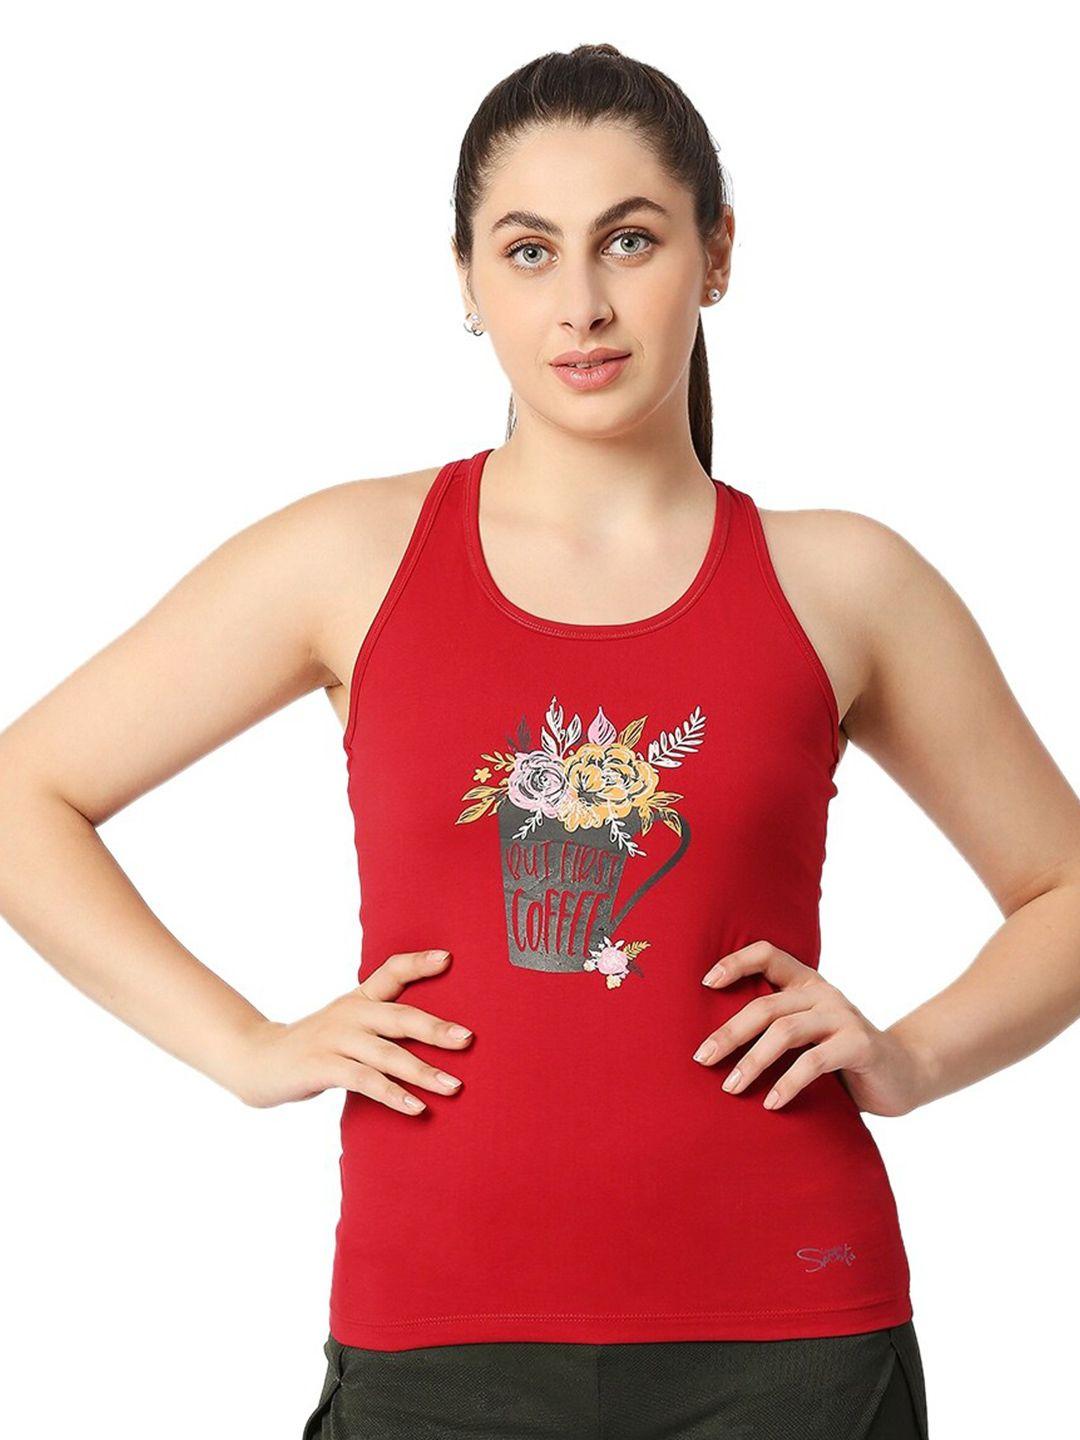 lovable sport graphic printed round neck sleeveless tank top